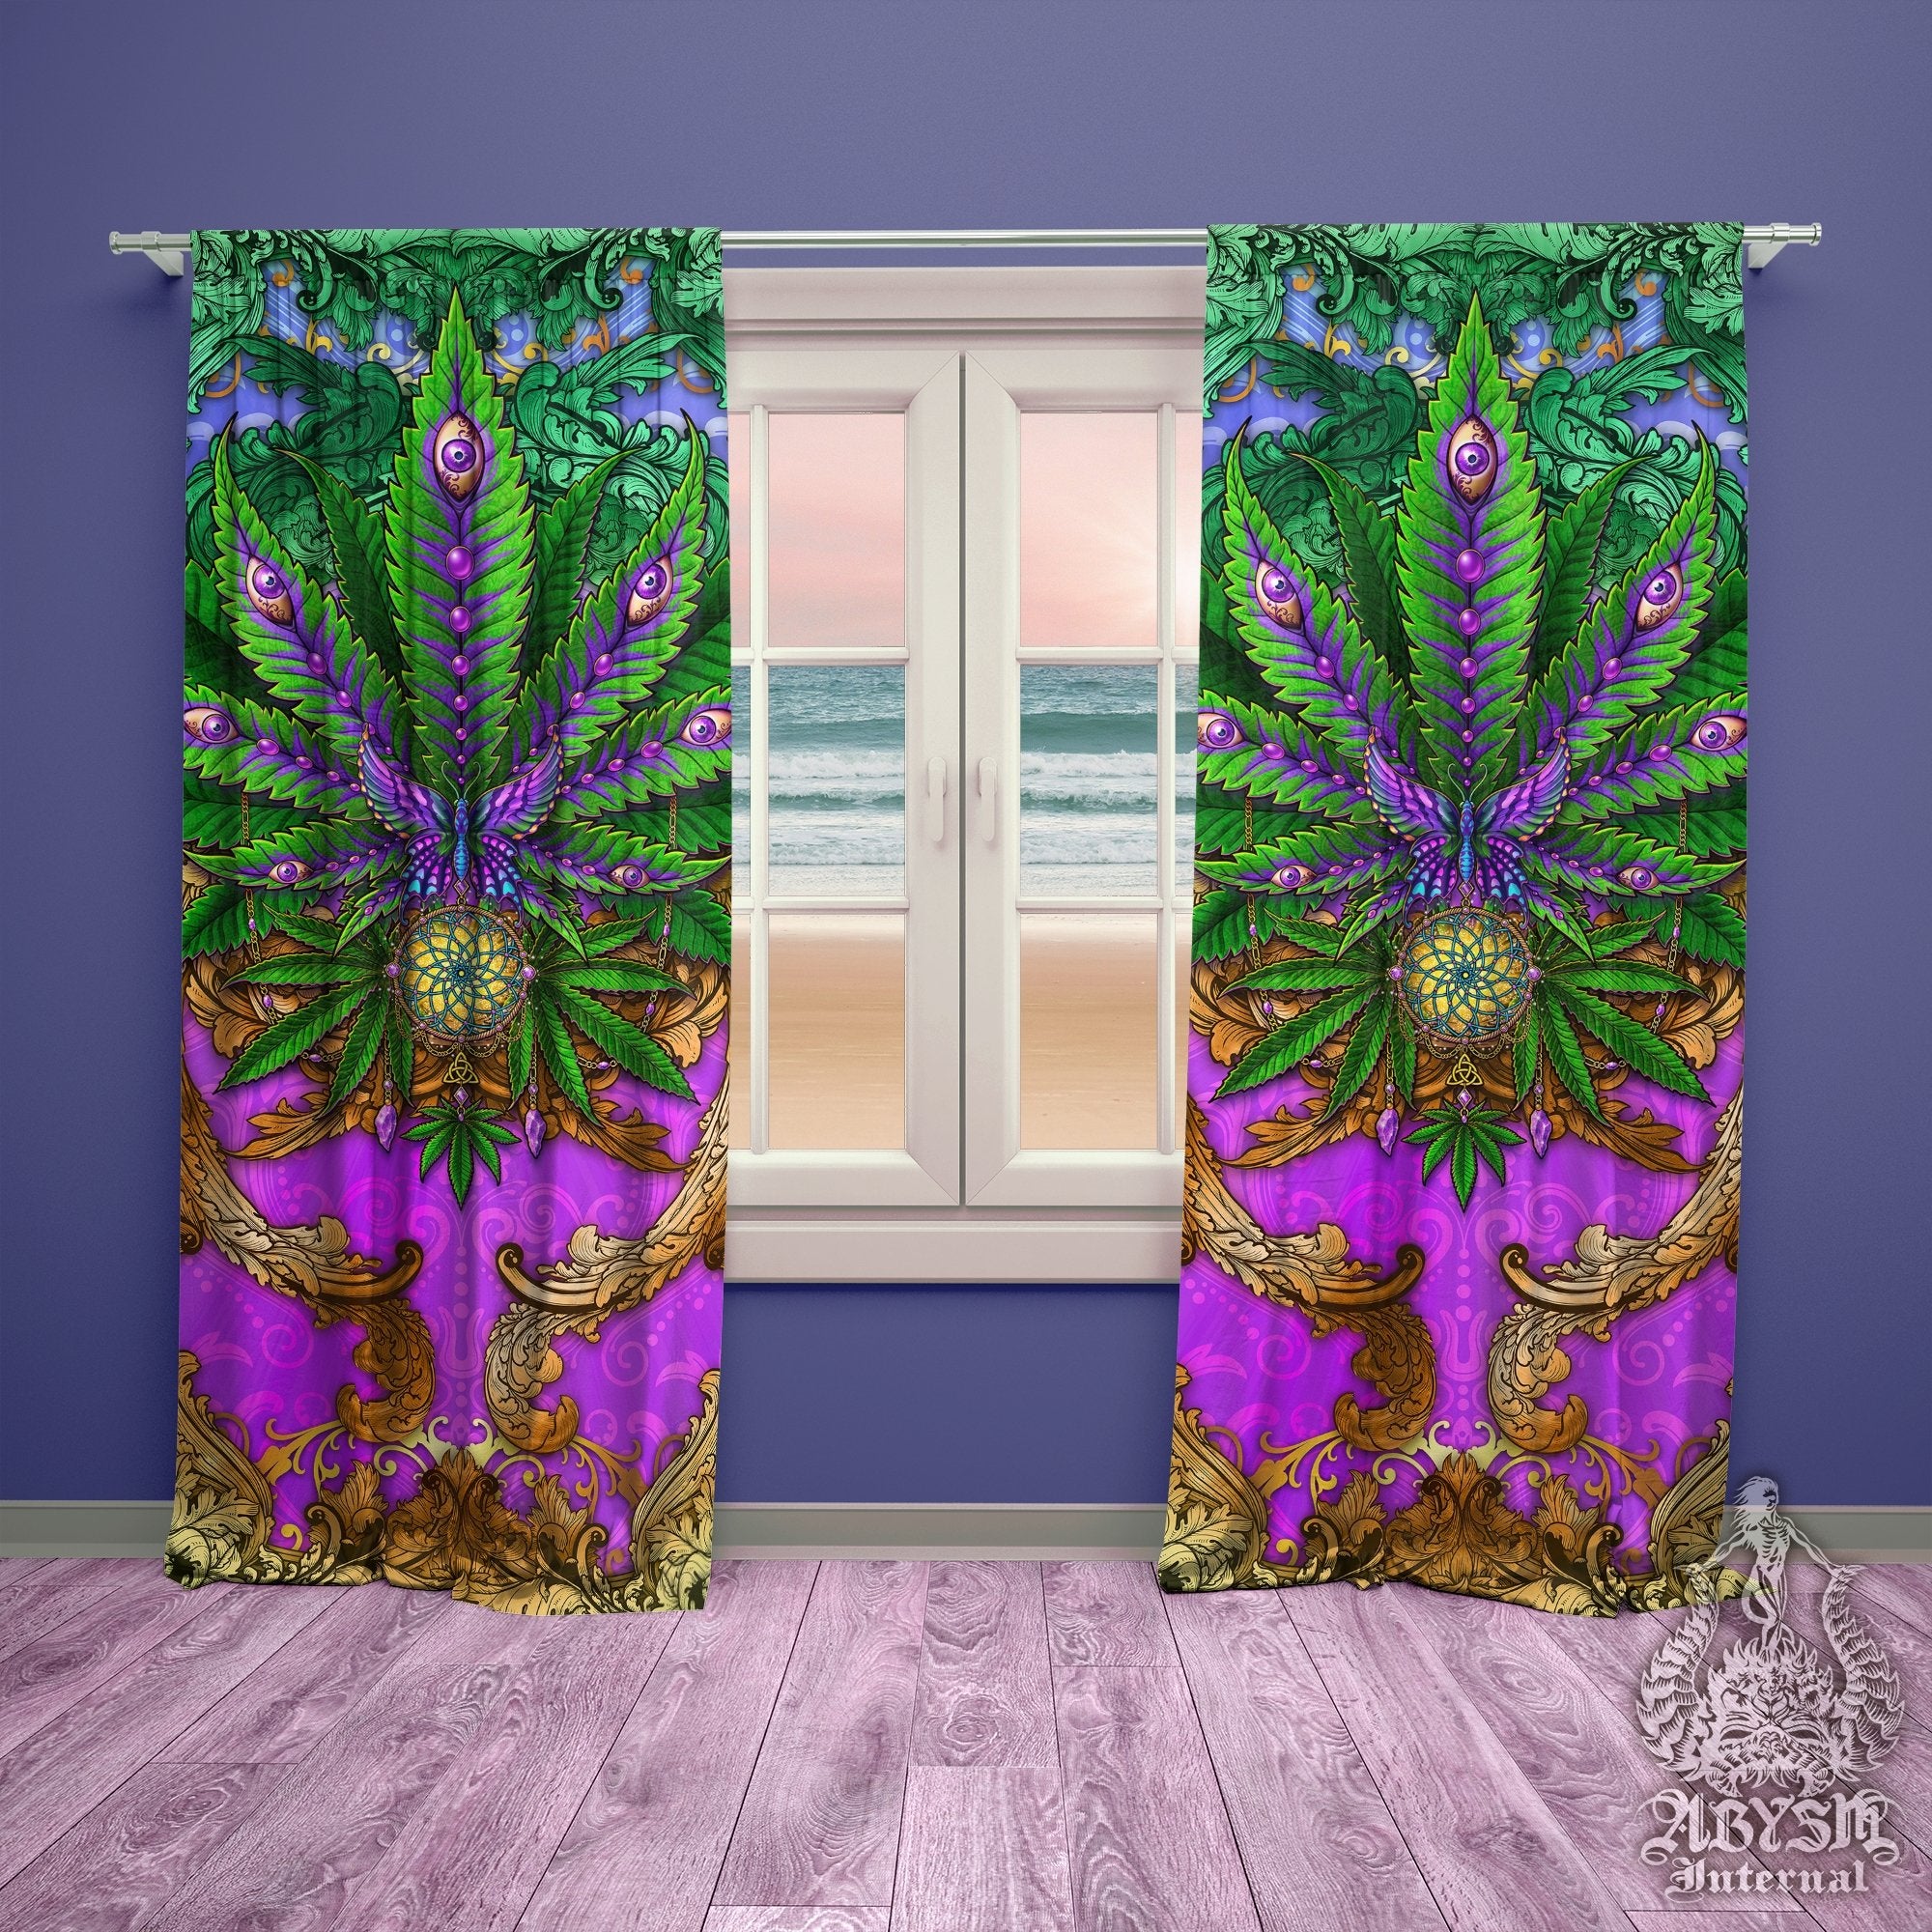 Weed Blackout Curtains, Cannabis Home and Shop Decor, Long Window Panels, Indie Hippie Print, 420 Room Art - Nature - Abysm Internal